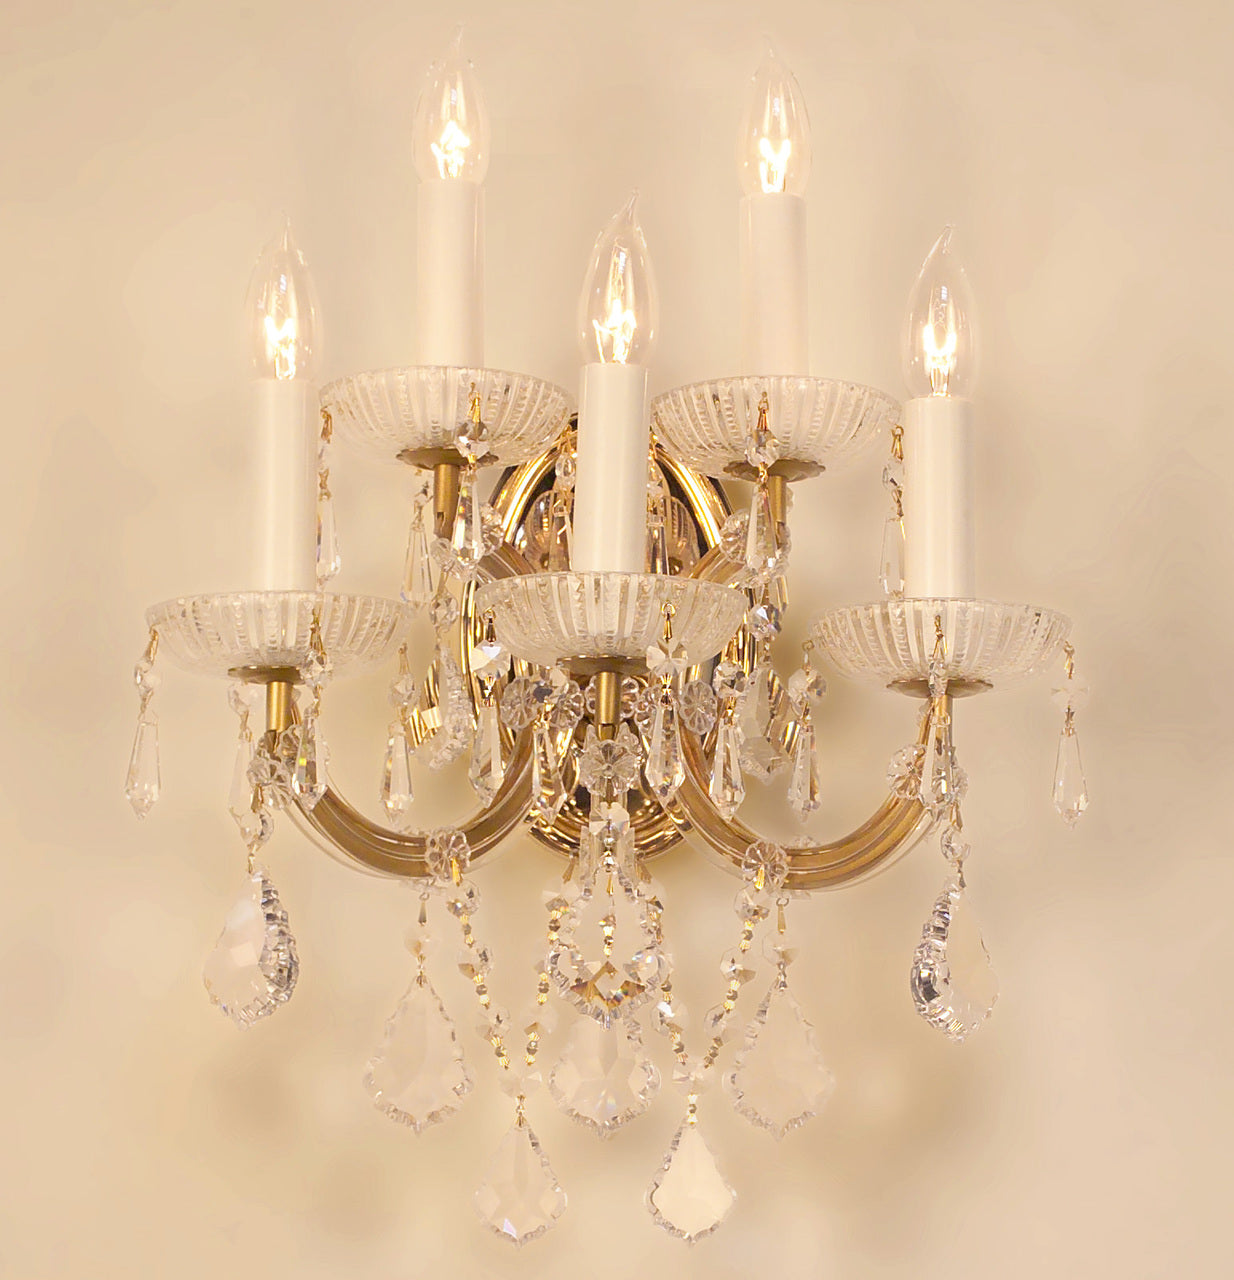 Classic Lighting 8105 OWG S Maria Theresa Traditional Crystal Wall Sconce in Olde World Gold (Imported from Italy)